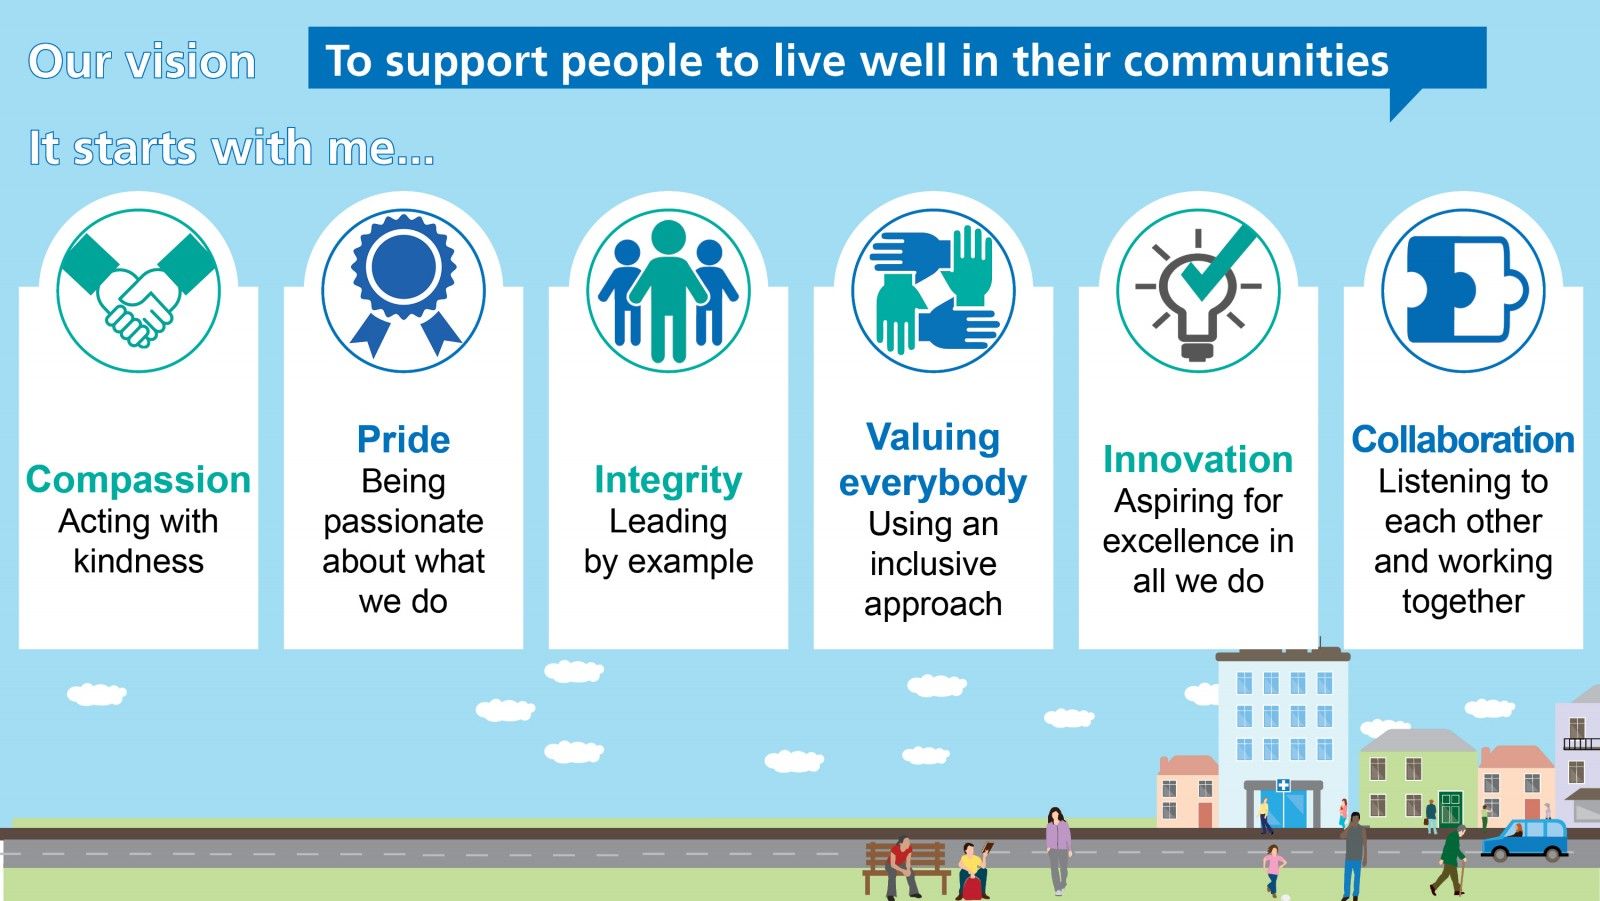 Summary of LPFT vision and values